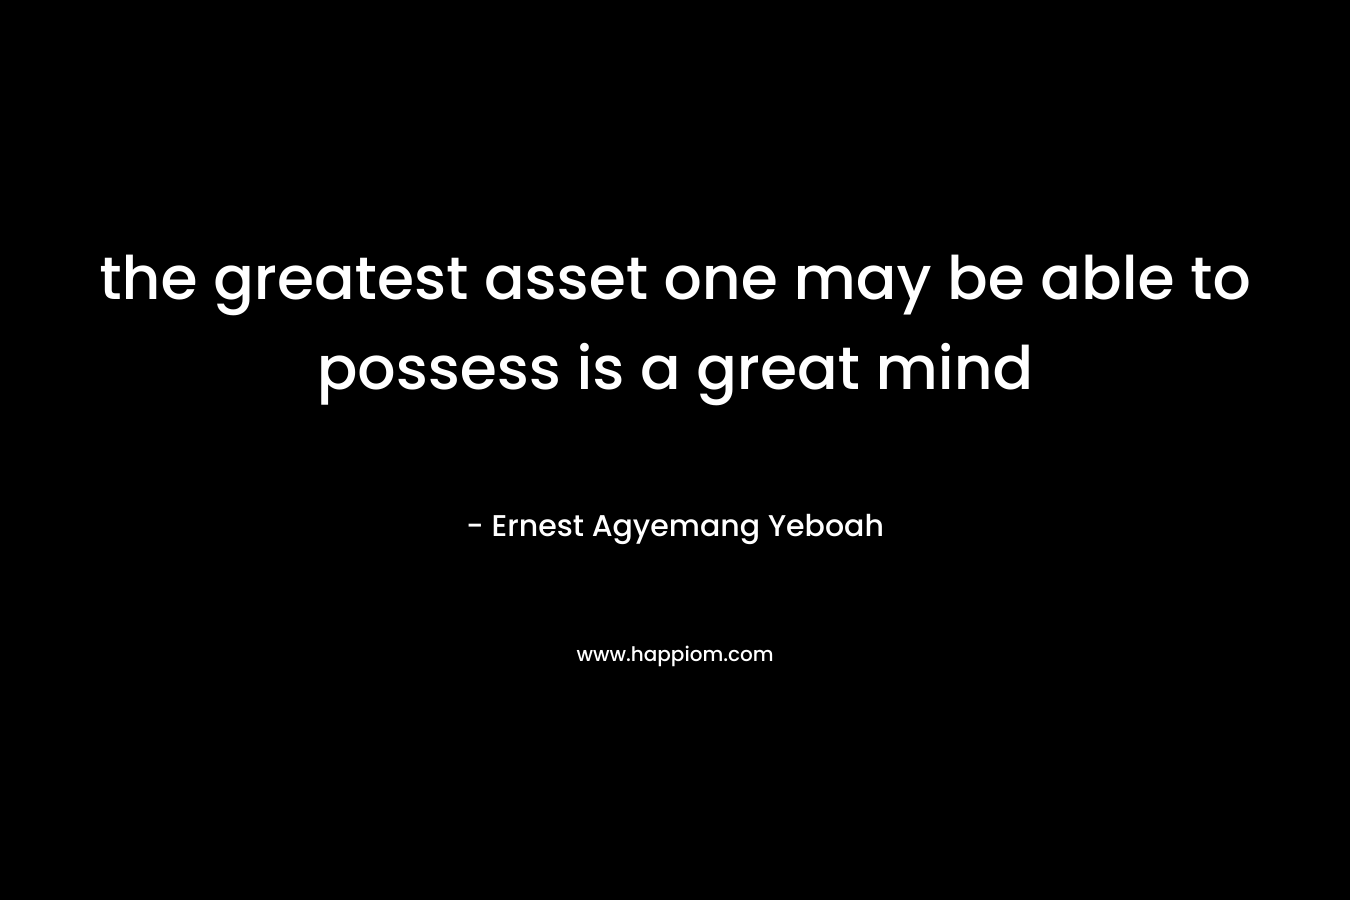 the greatest asset one may be able to possess is a great mind